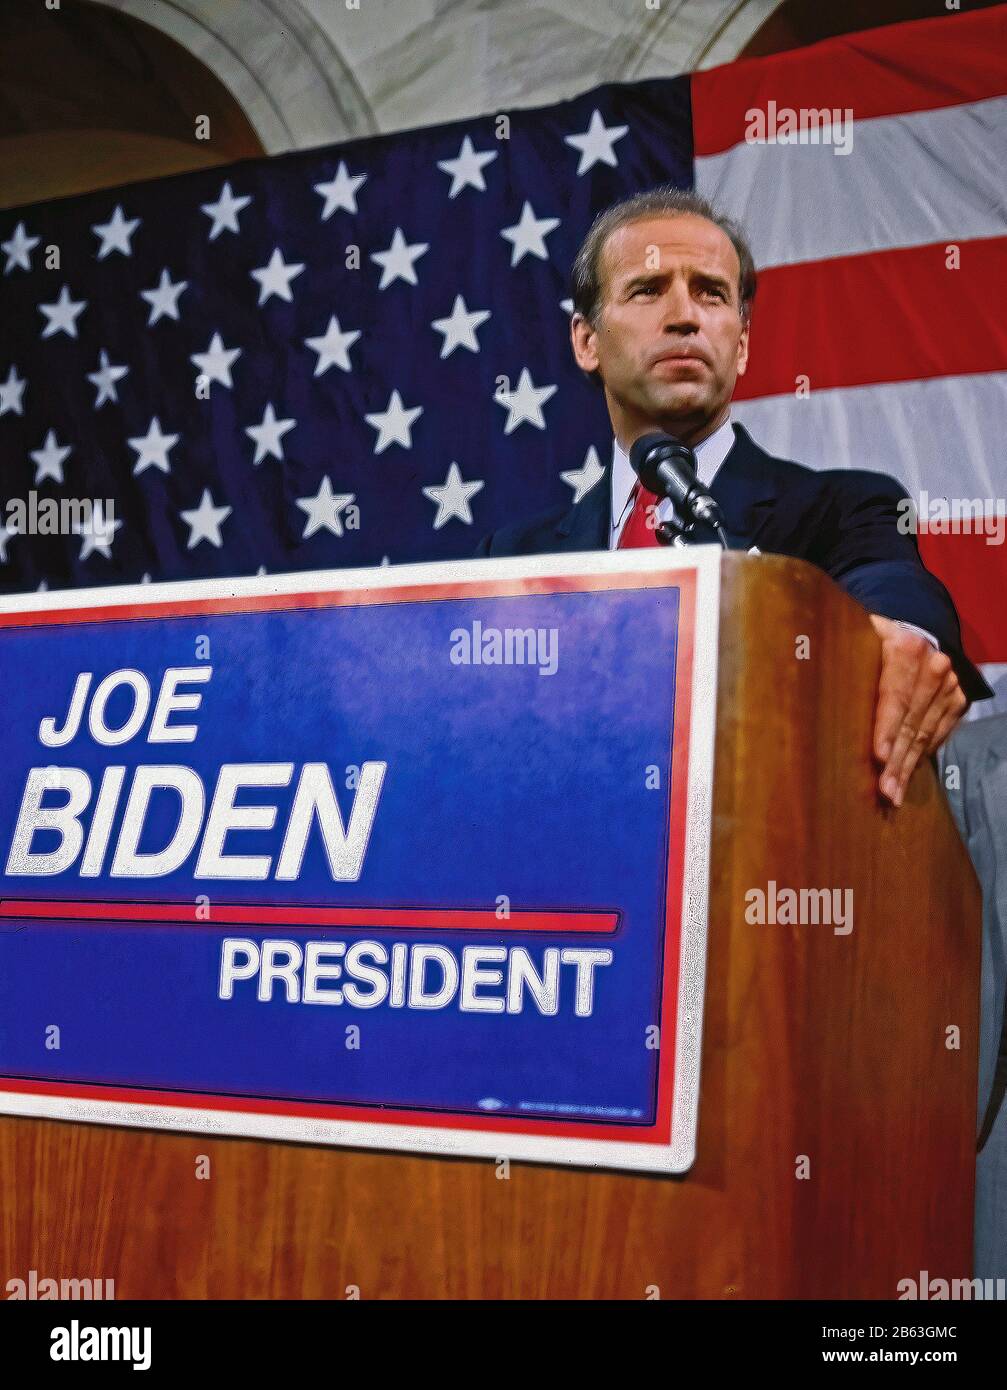 Washington, DC. USA, June 9, 1987 Senator Joe Biden Democrat from Delaware after announcing his candidacy for president in Wilmington, Delaware earlier in the morning, makes an appearance at the Dirksen Senate office building. Credit: Mark Reinstein/MediaPunch Stock Photo